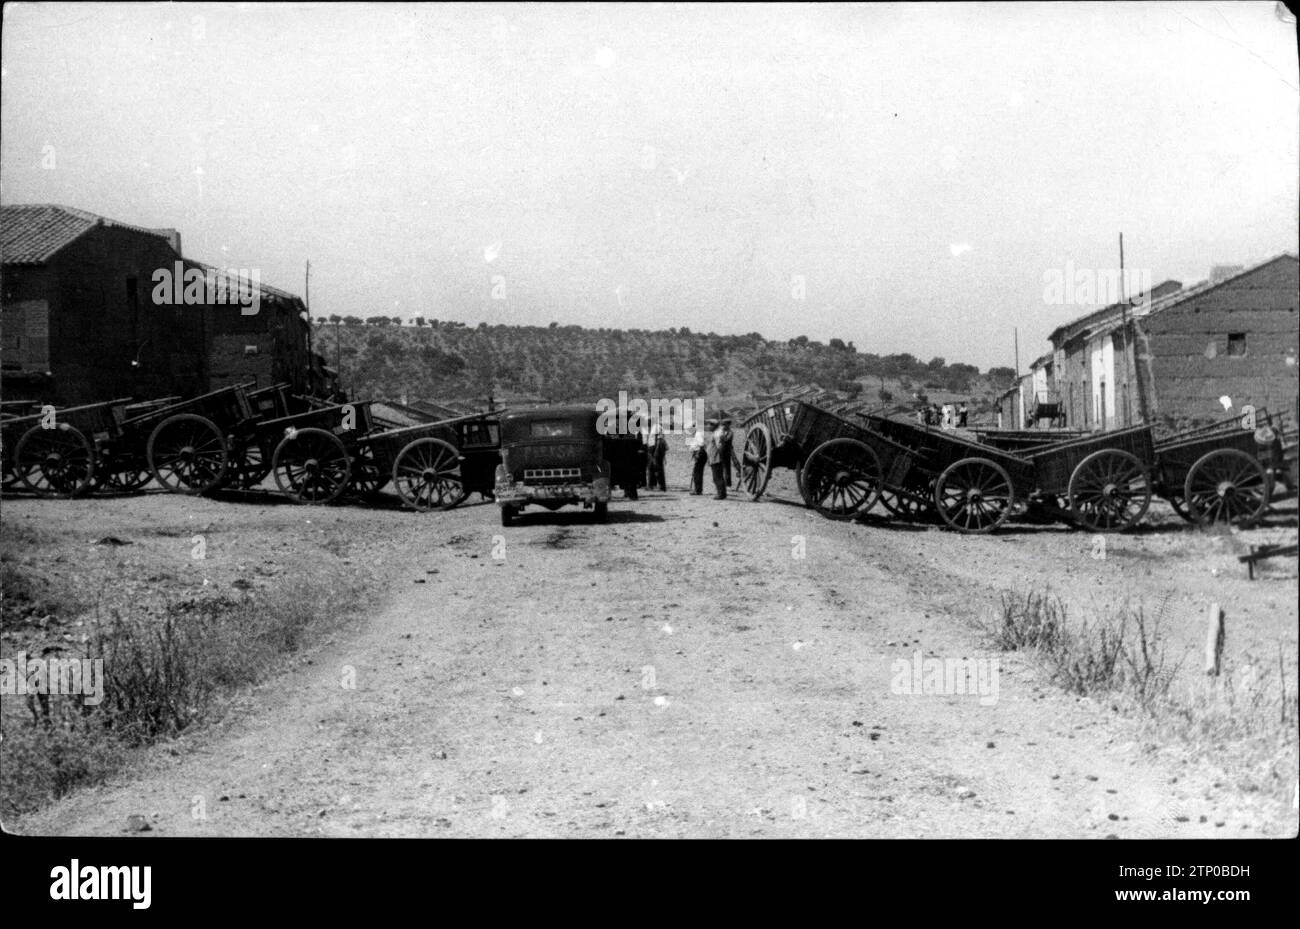 08/31/1936. Young men from the town of Sevilleja de la Jara (Toledo) use all the cars they have as a barrier to carry out vehicle control, while the Republican Troops fight on the Extremadura front. Credit: Album / Archivo ABC / Piortiz Stock Photo